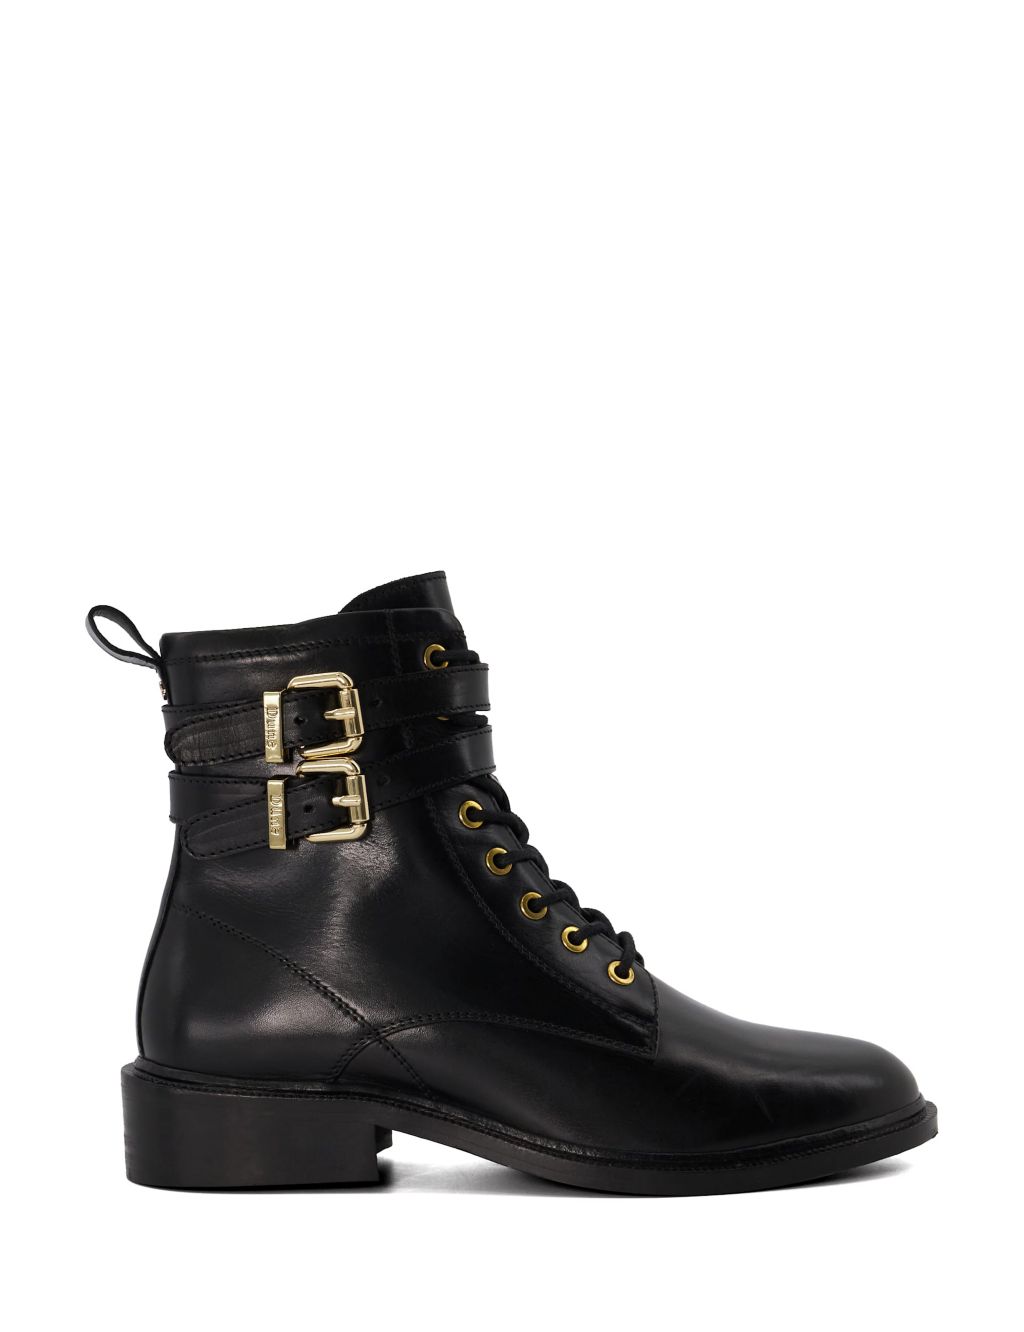 Leather Lace Up Buckle Flat Ankle Boots image 1